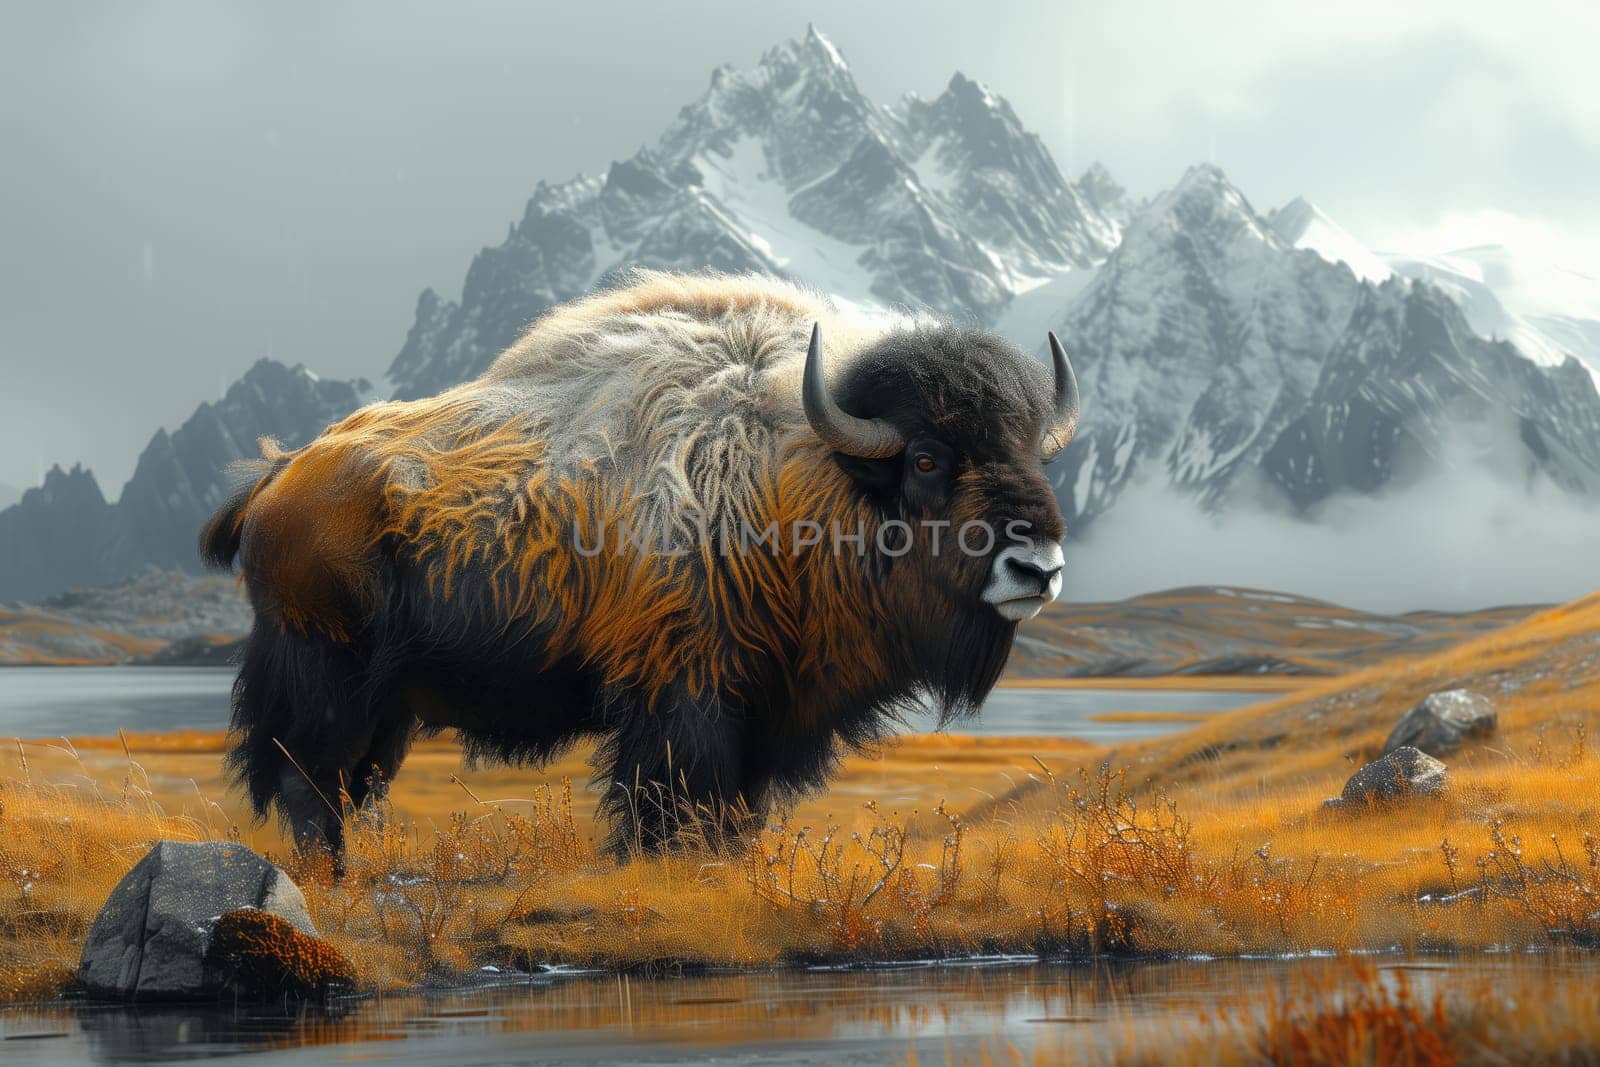 A bison is peacefully grazing in a grassy field by a tranquil lake, with majestic mountains and fluffy clouds in the sky creating a stunning natural landscape